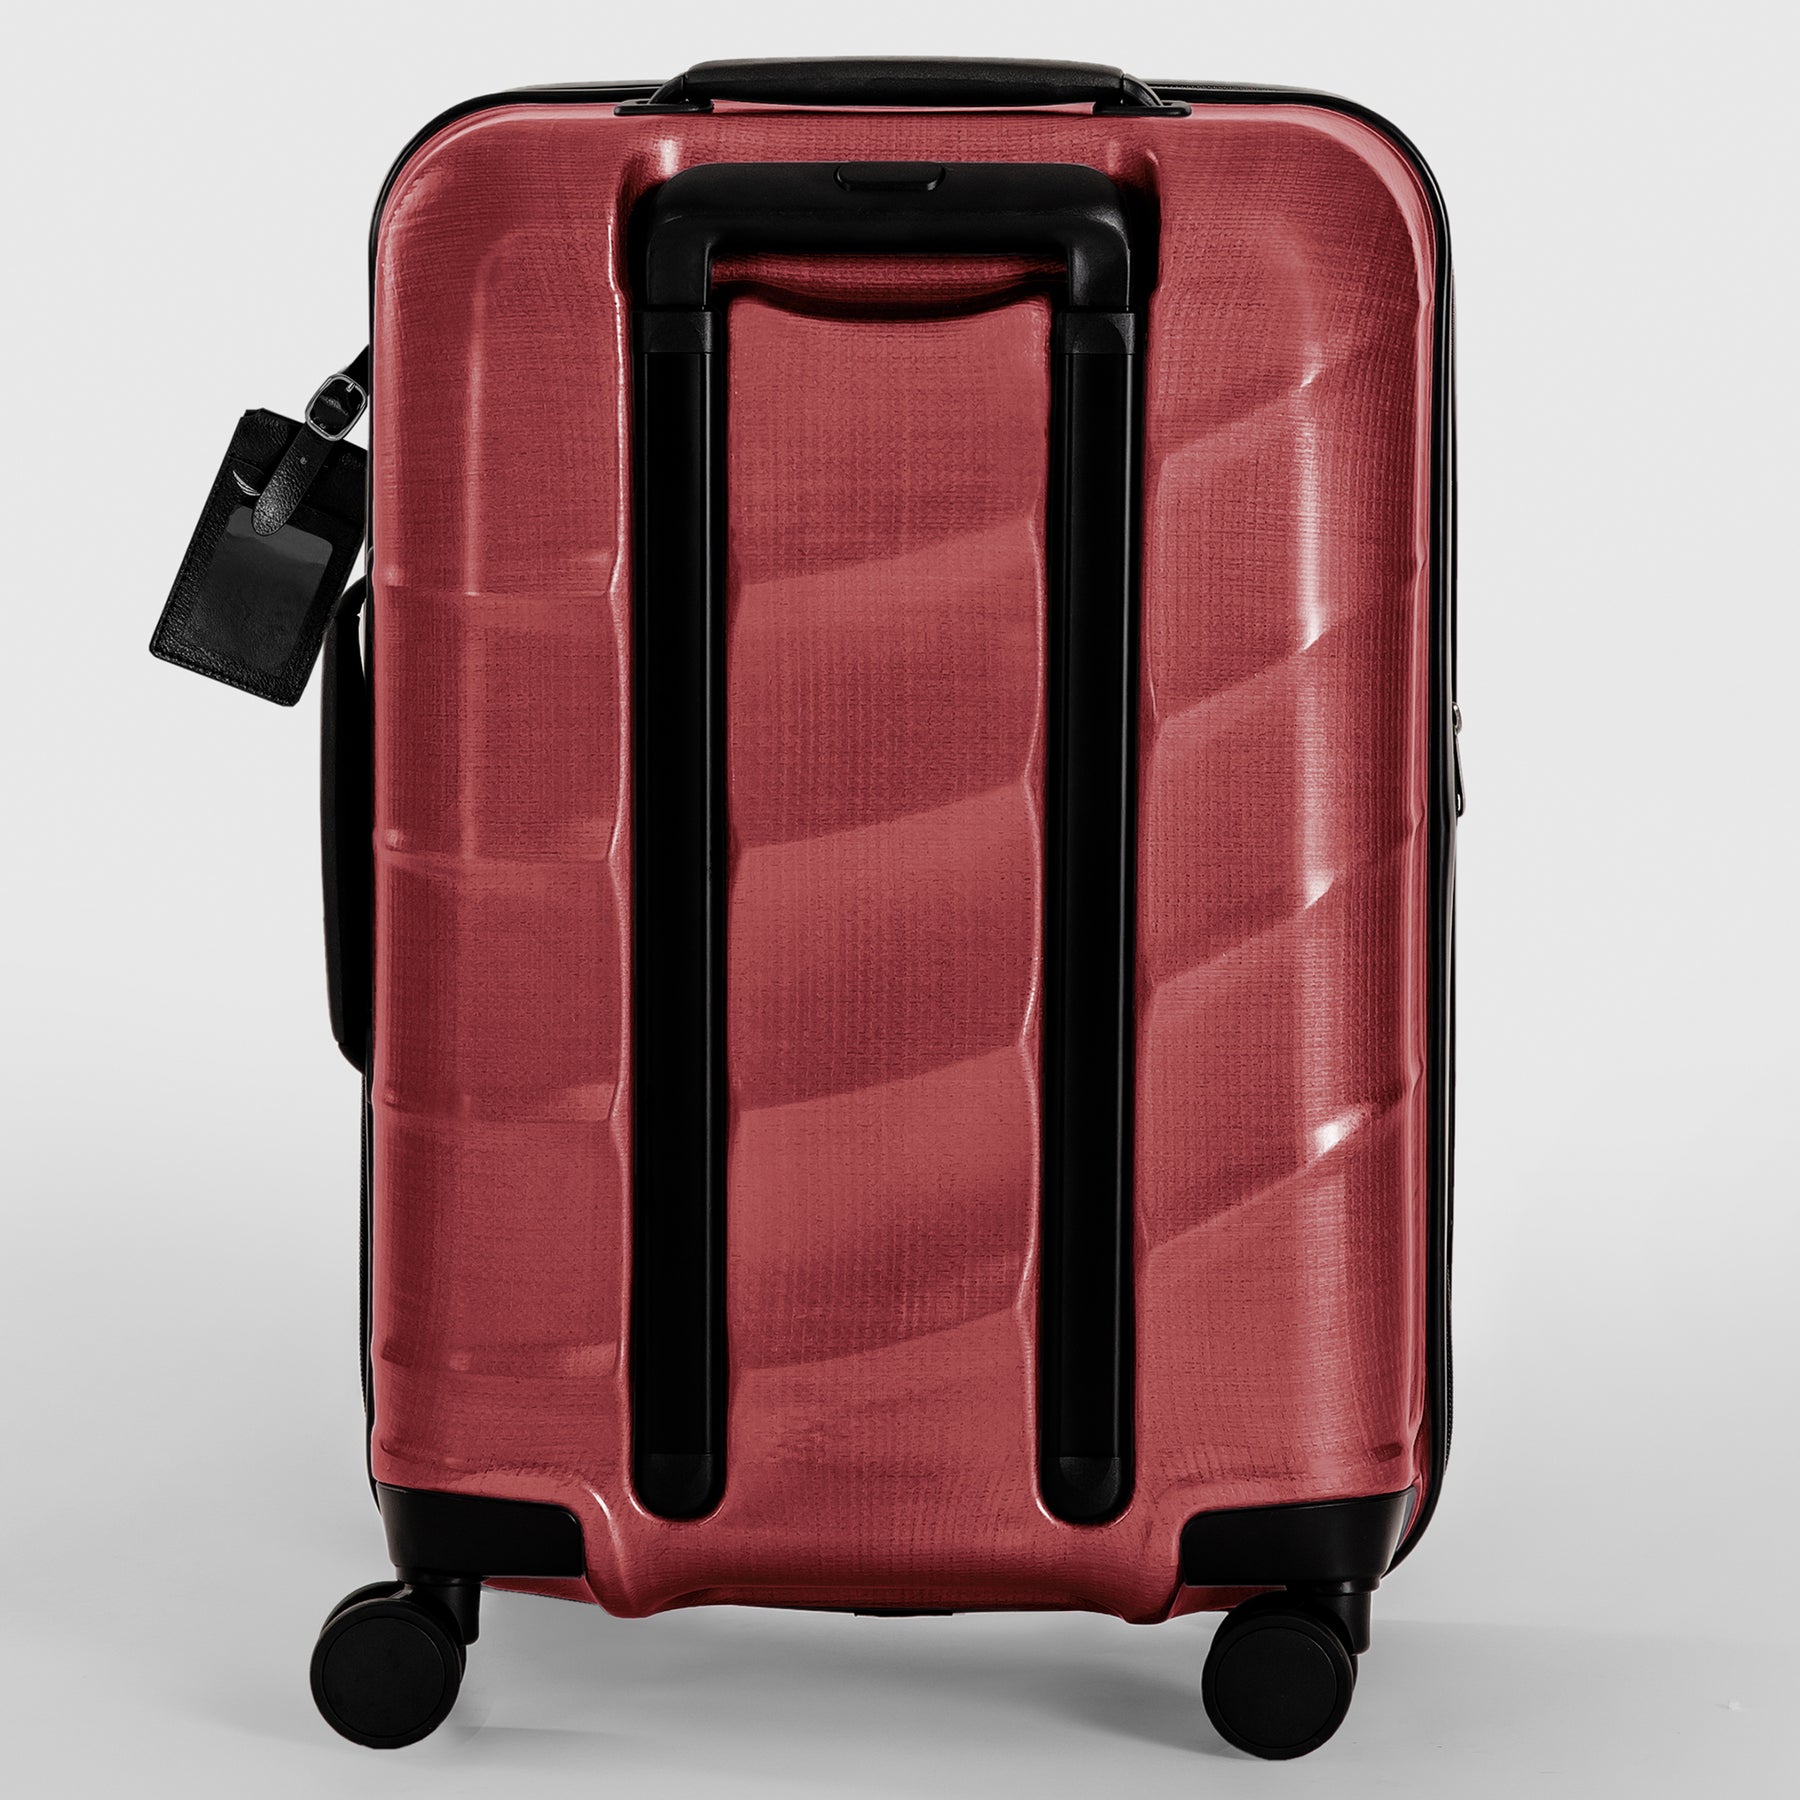 Best Expandable International Carry On Luggage - Duravo